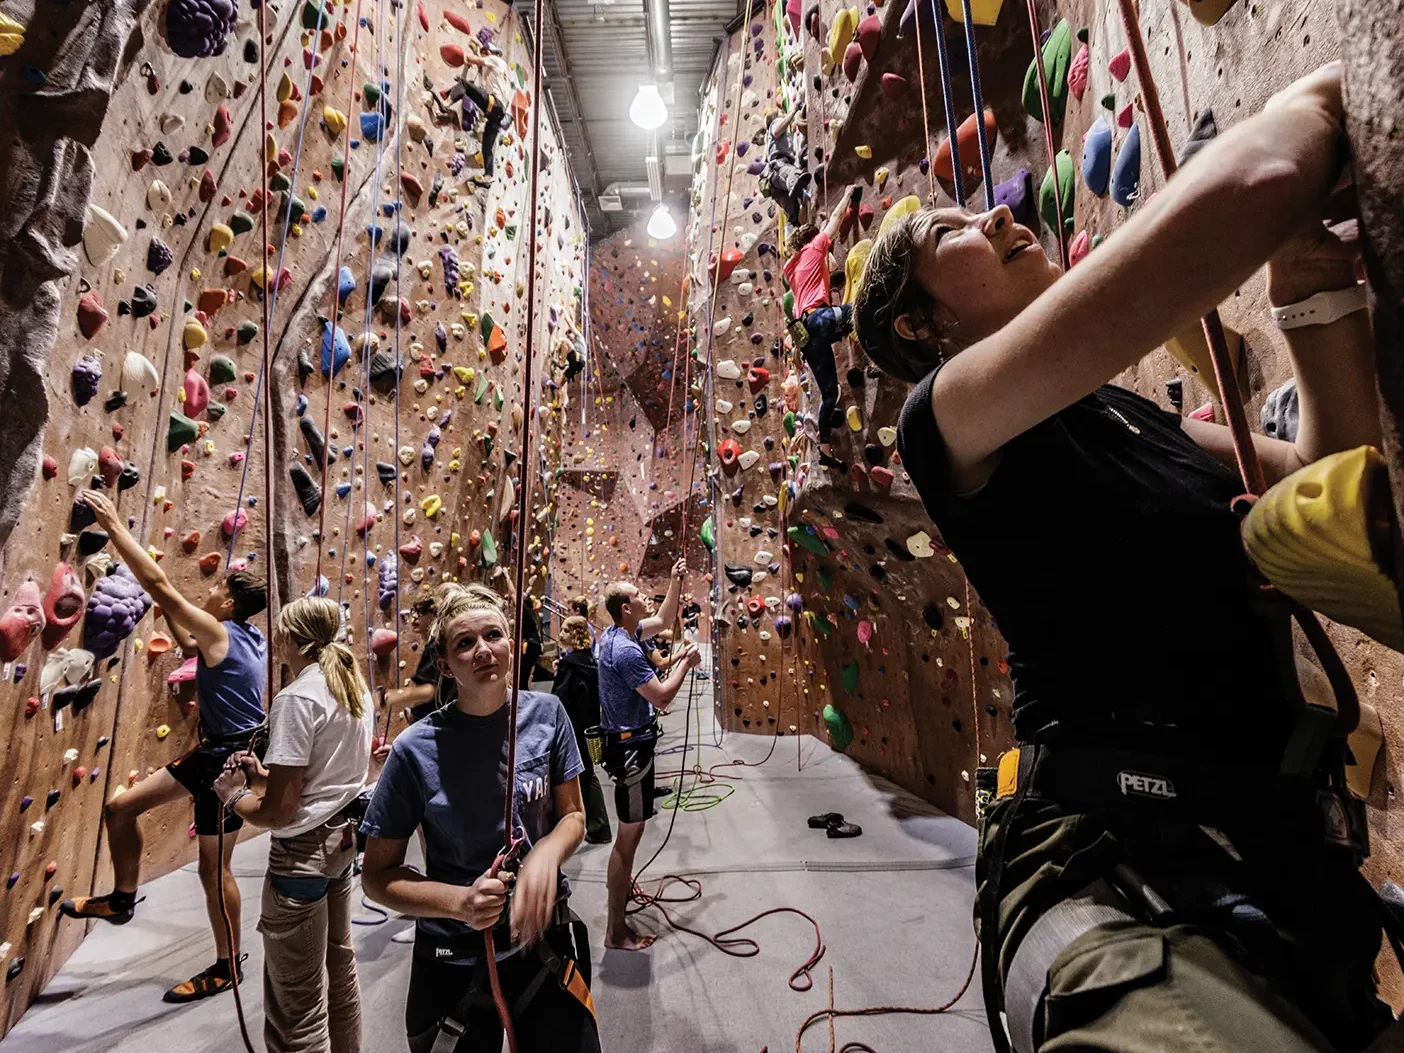 A BYU student looks up at the rock climbing wall in an indoor venue